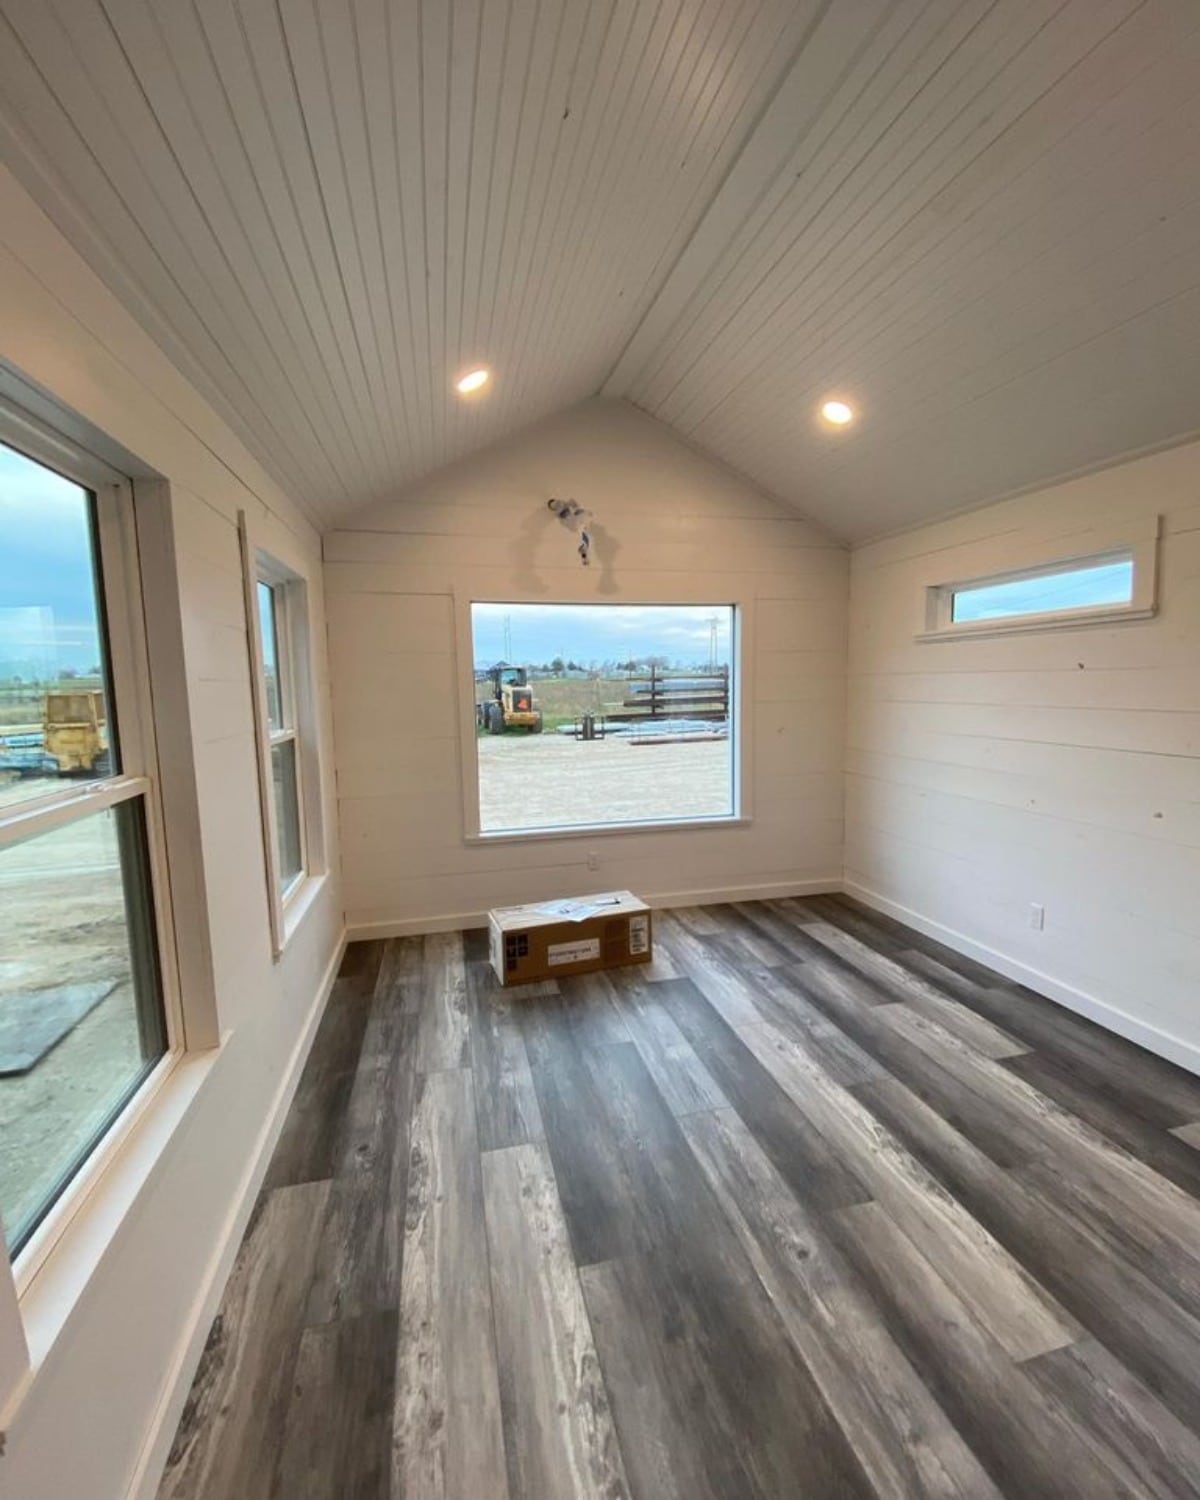 Living area of 40' Tiny House has an ample space and large windows